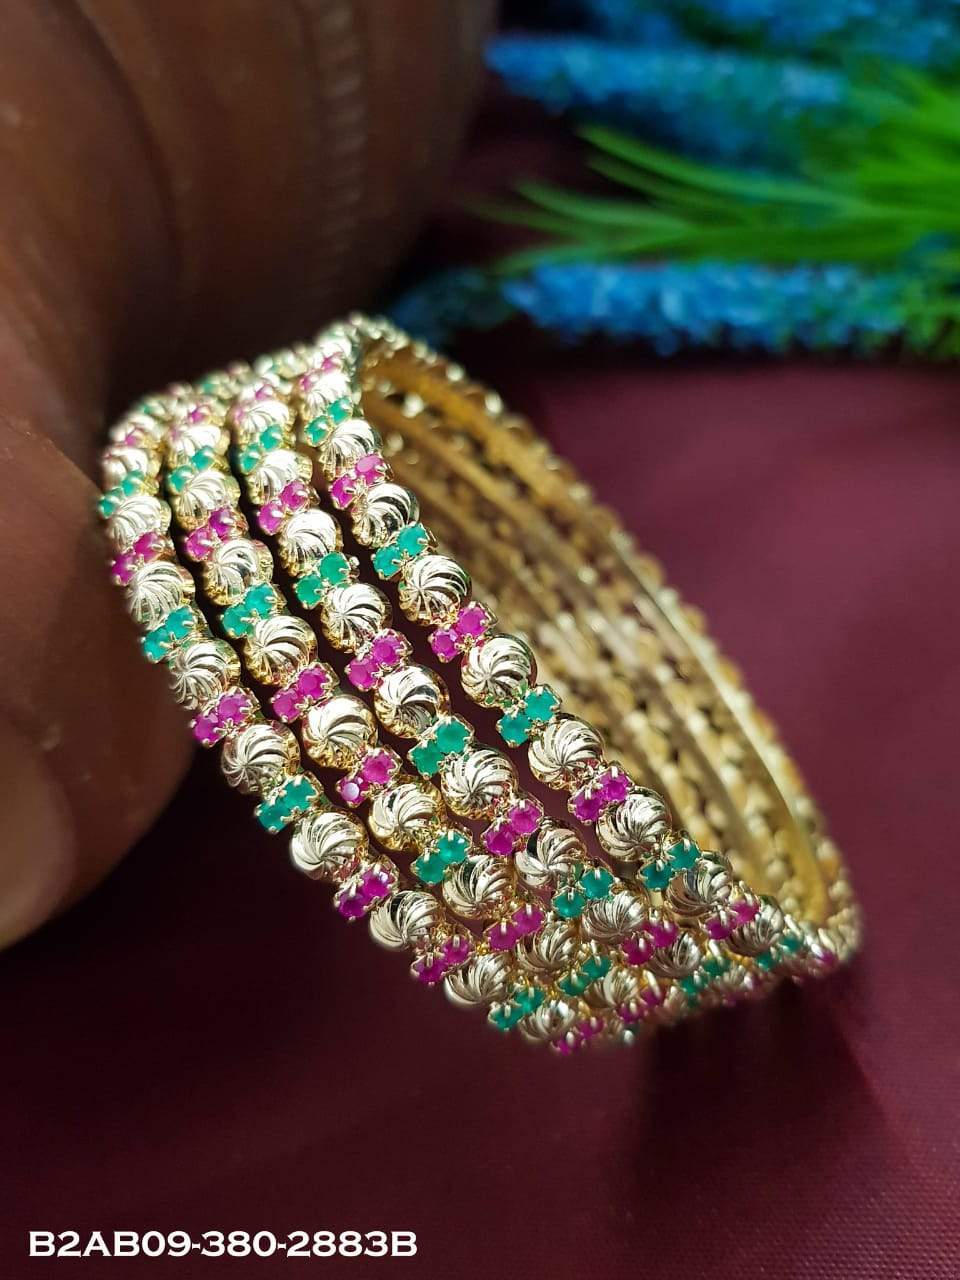 Jeeva Collection High quality Ruby Emerald Stone Set of 4 Bangles B2AB09-380-2882A